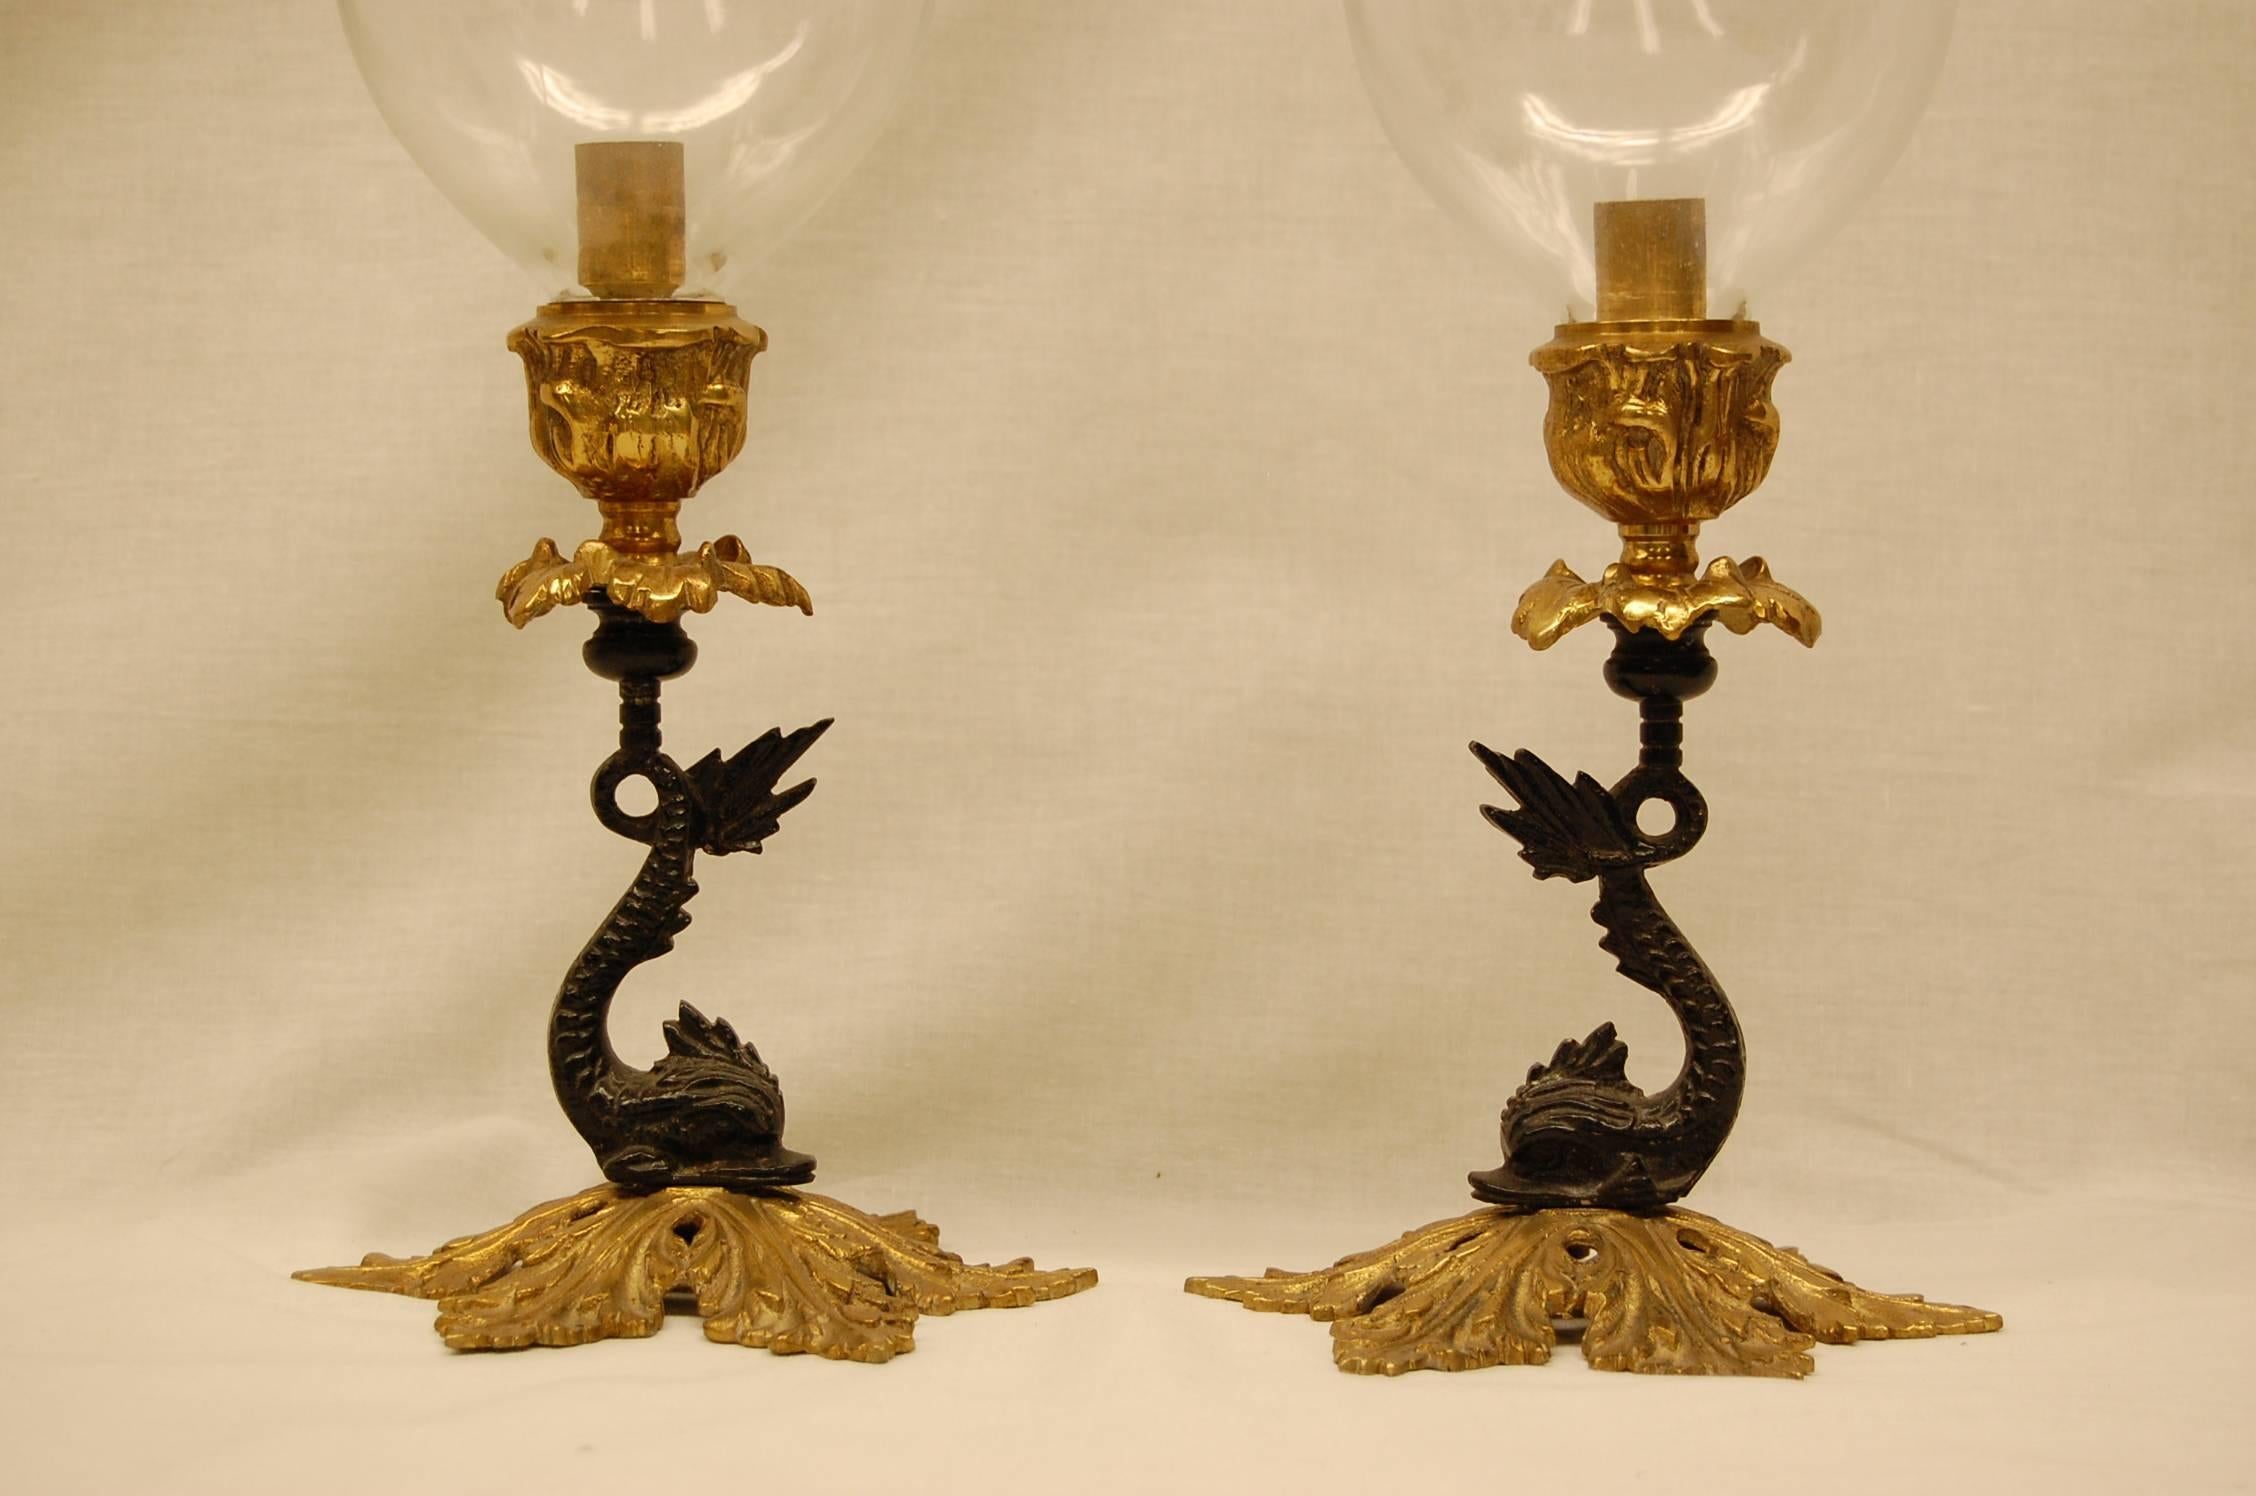 Unknown Pair of Reproduction Brass Candlesticks with Glass Hurricanes on Dolphin Bases